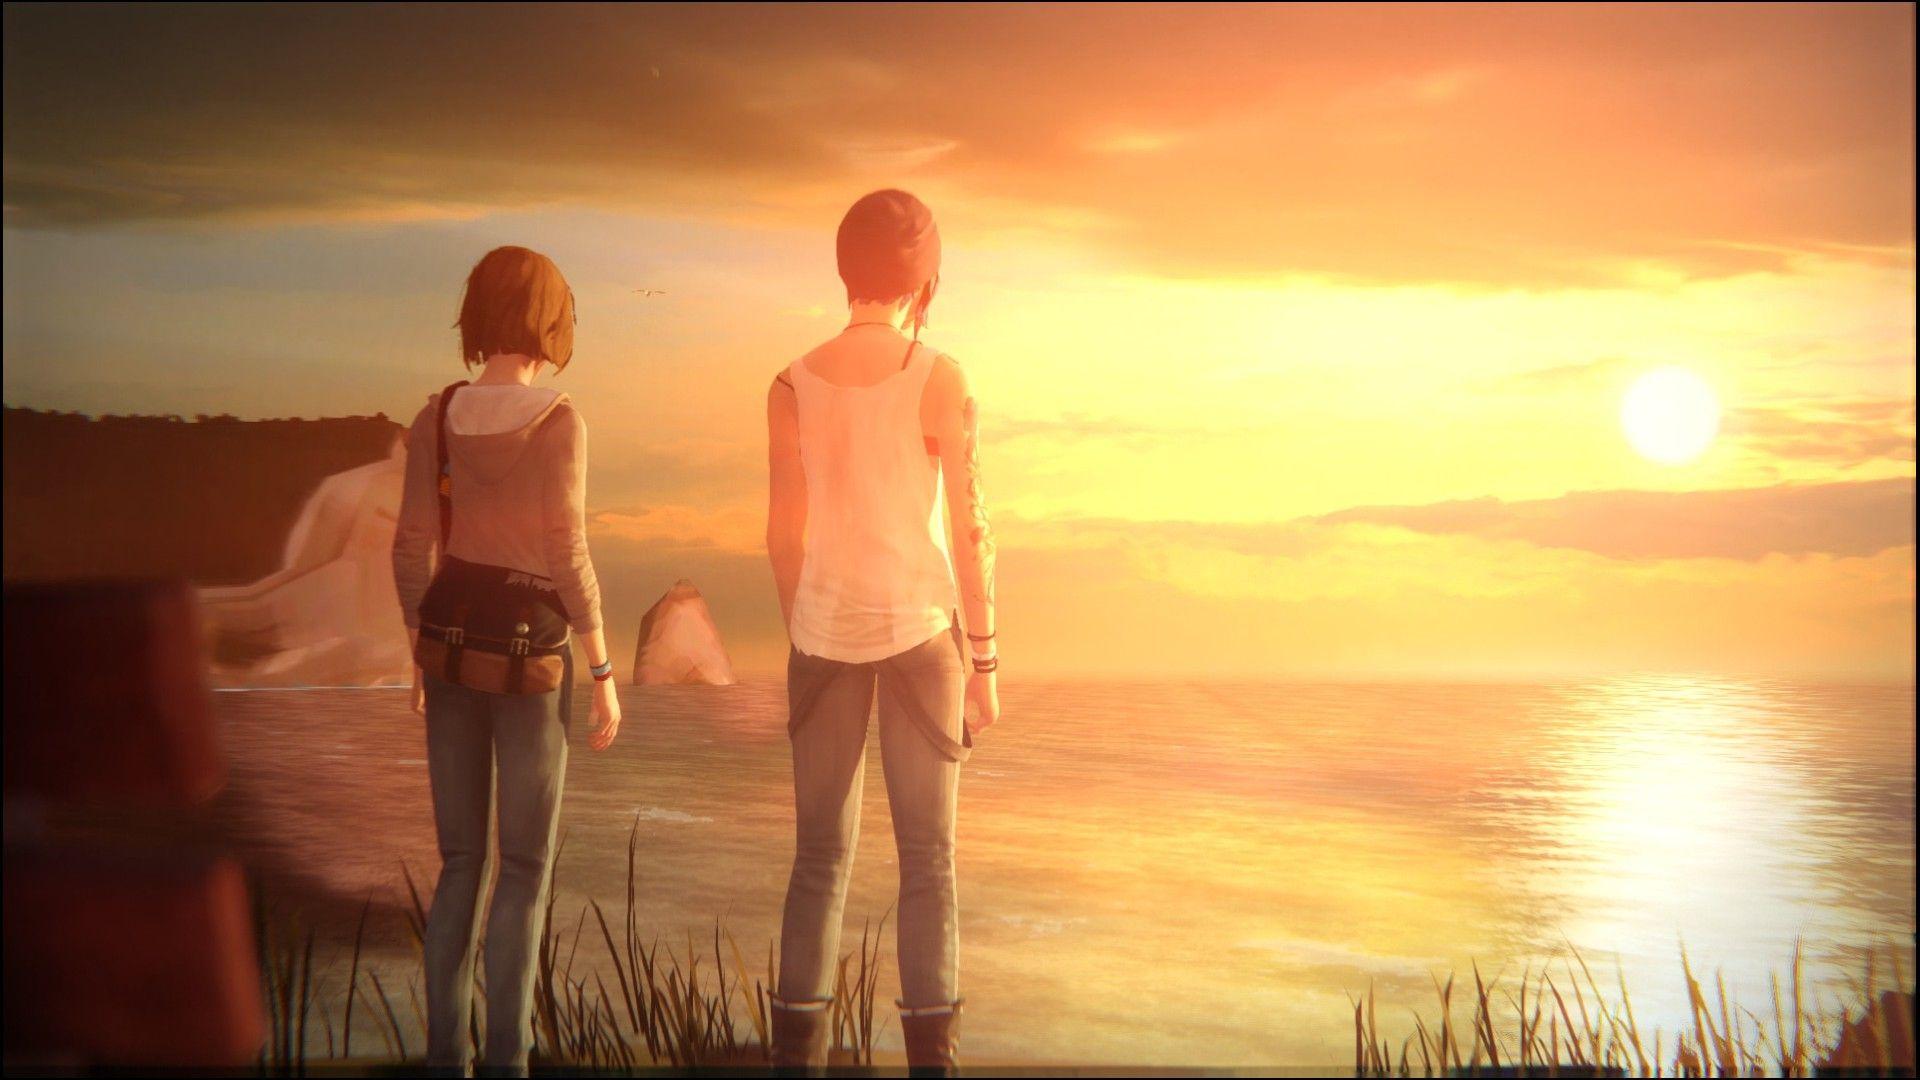 EP2 SPOILERS Life is Strange Wallpaper thread. Please post any game